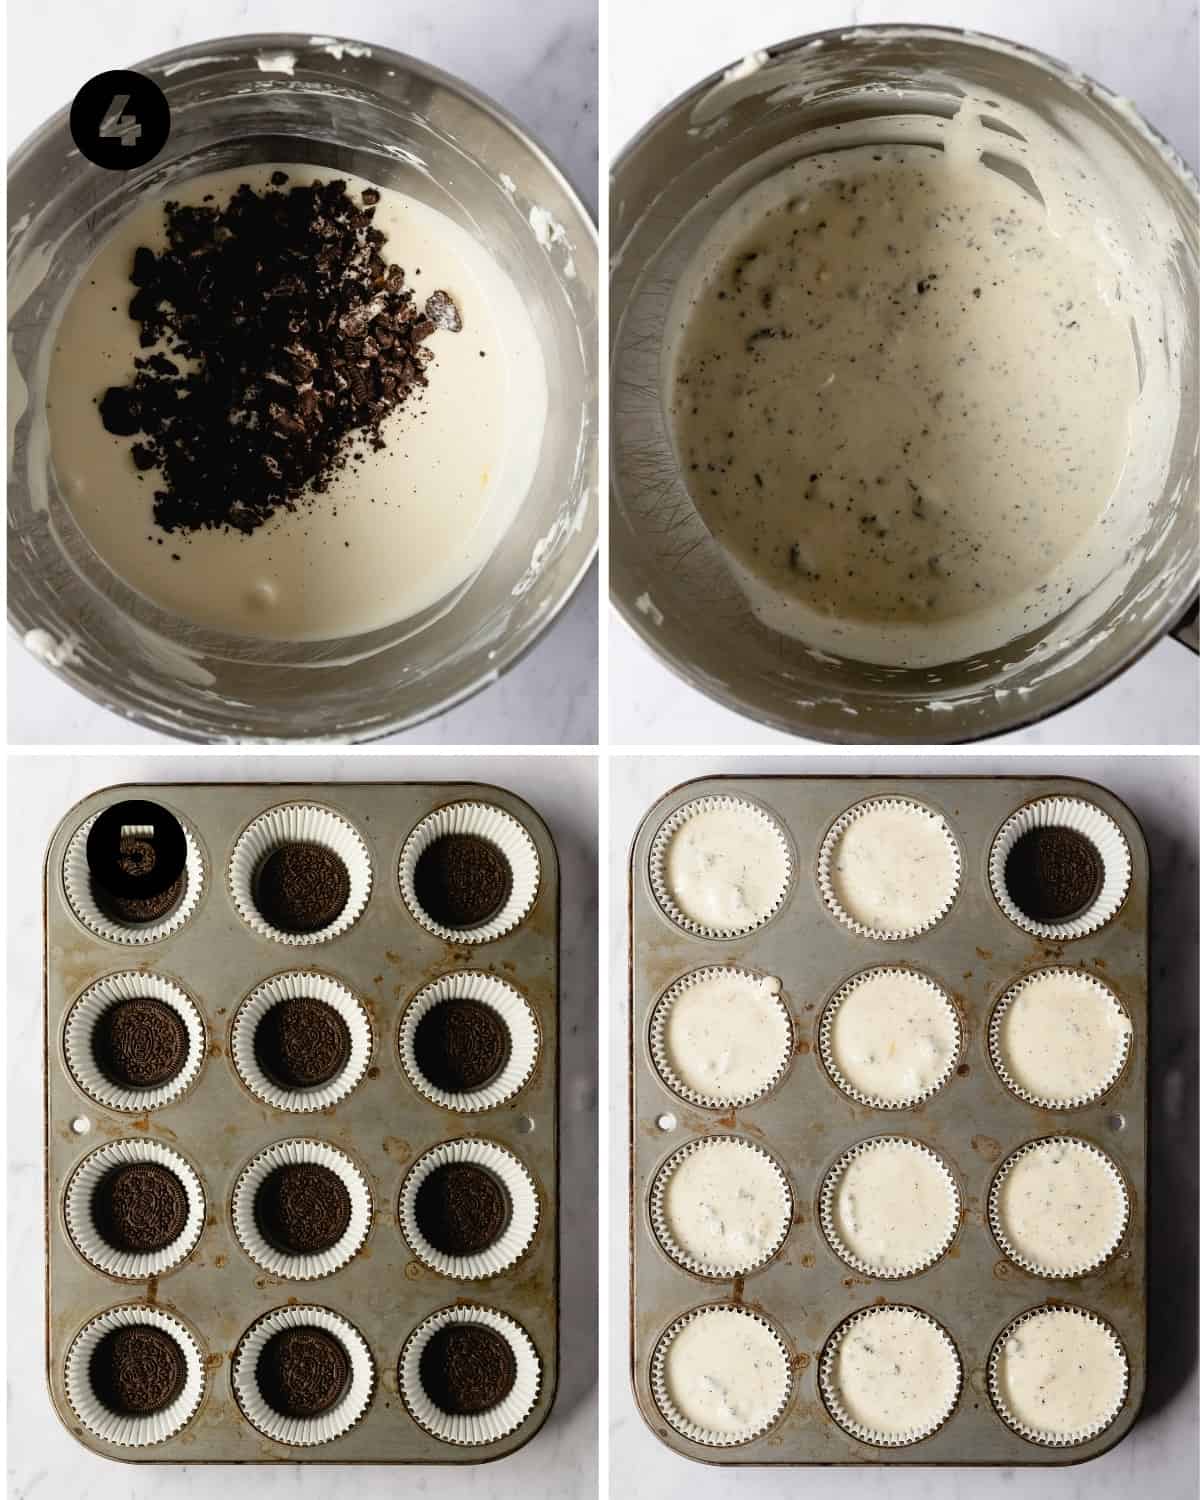 Mix the crushed Oreos into the cheesecake filling. Place an oreo into each cupcake liner. Scoop oreo cheesecake filling into each cupcake liner. 